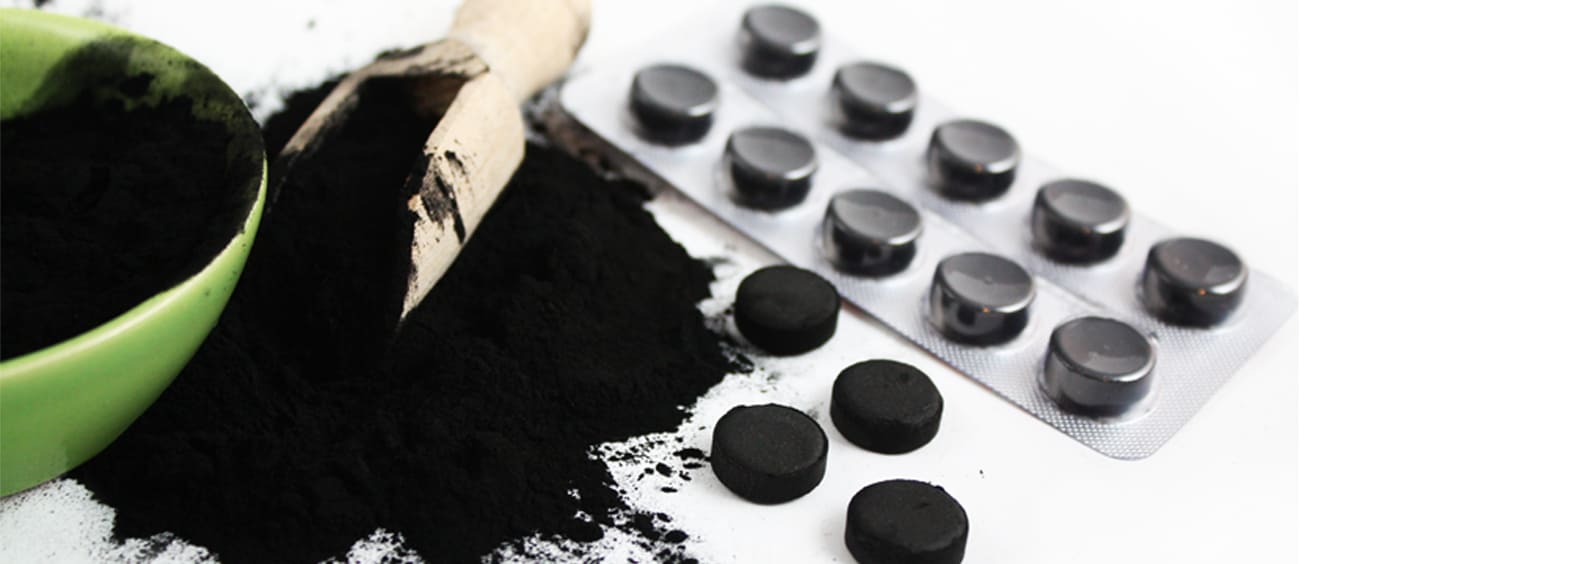 The Activated Charcoal Detox What is it and Does it Really Work?